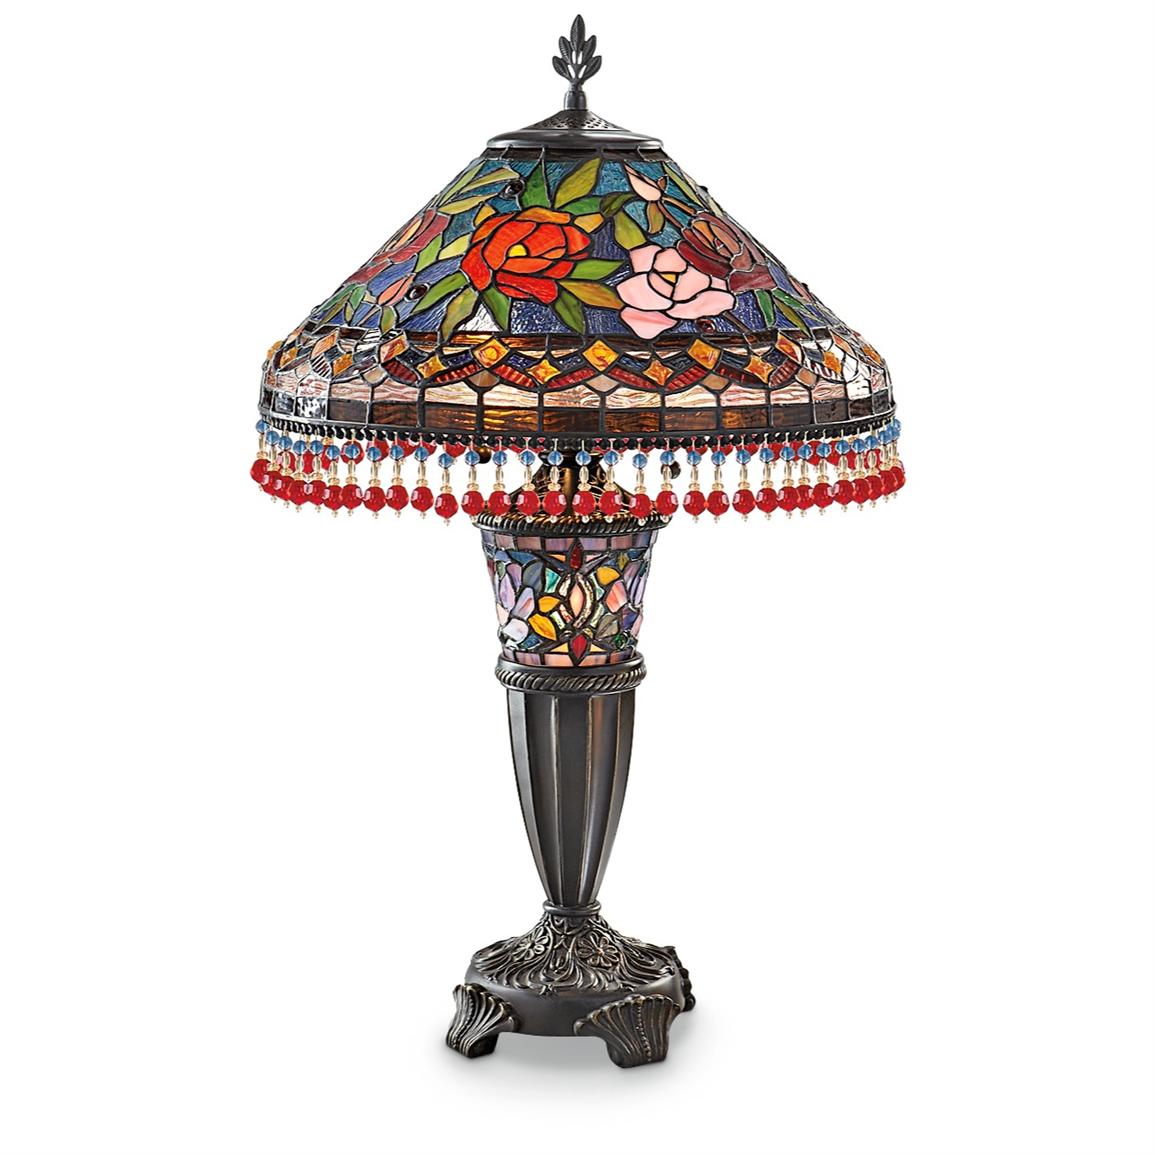 Beaded Double - lit Tiffany - style Table Lamp - 202872, Lighting at